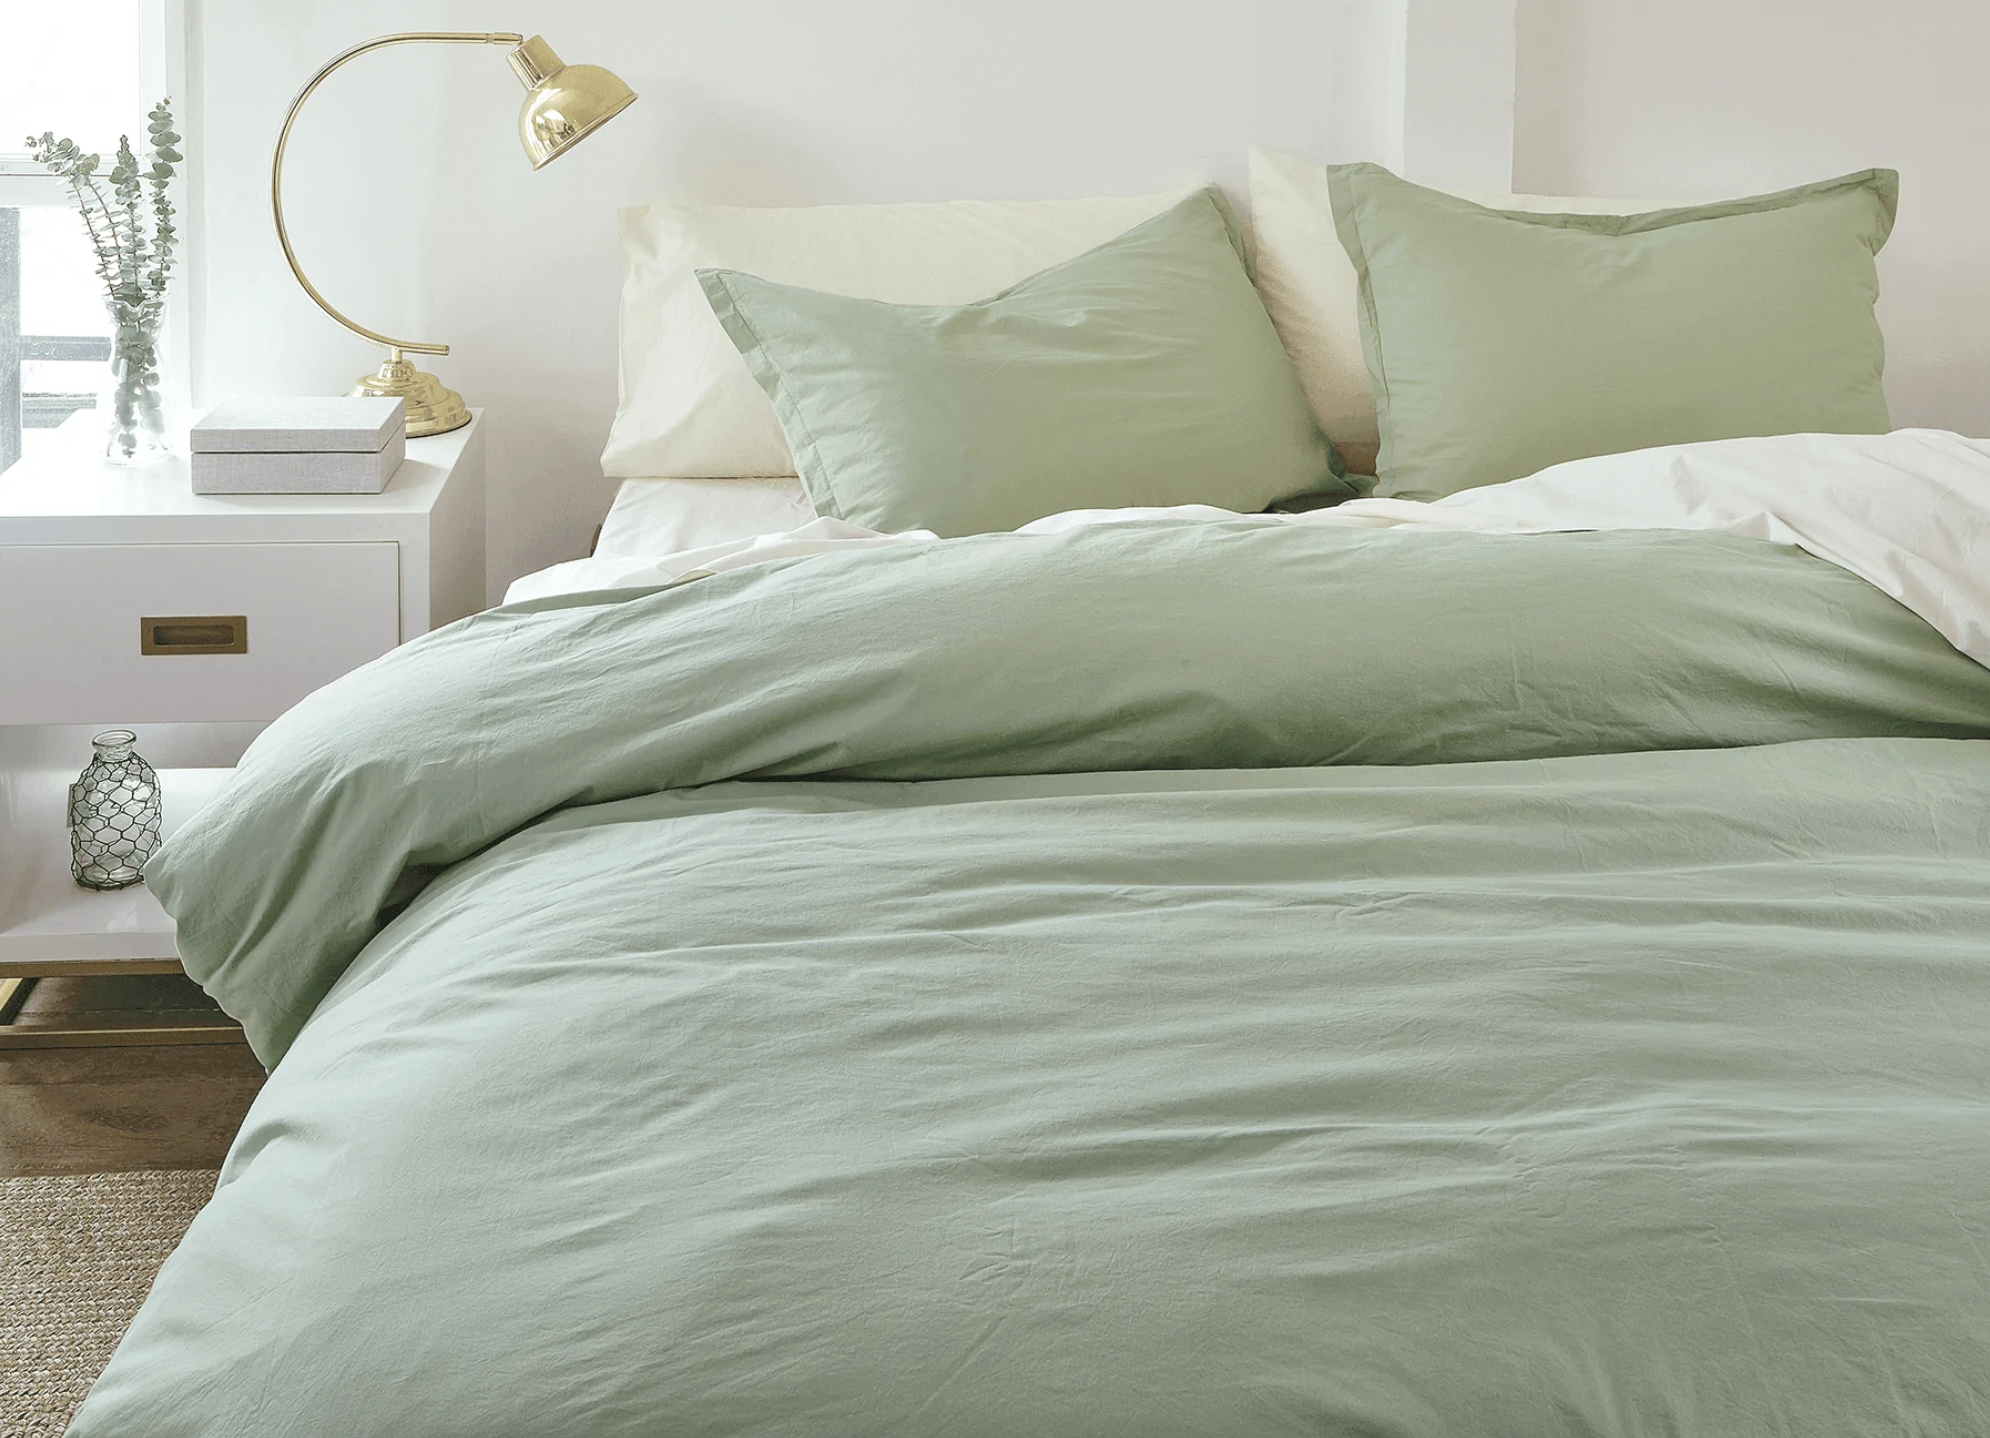 a set of percale sheets in a soft shade on a perfectly made up bed